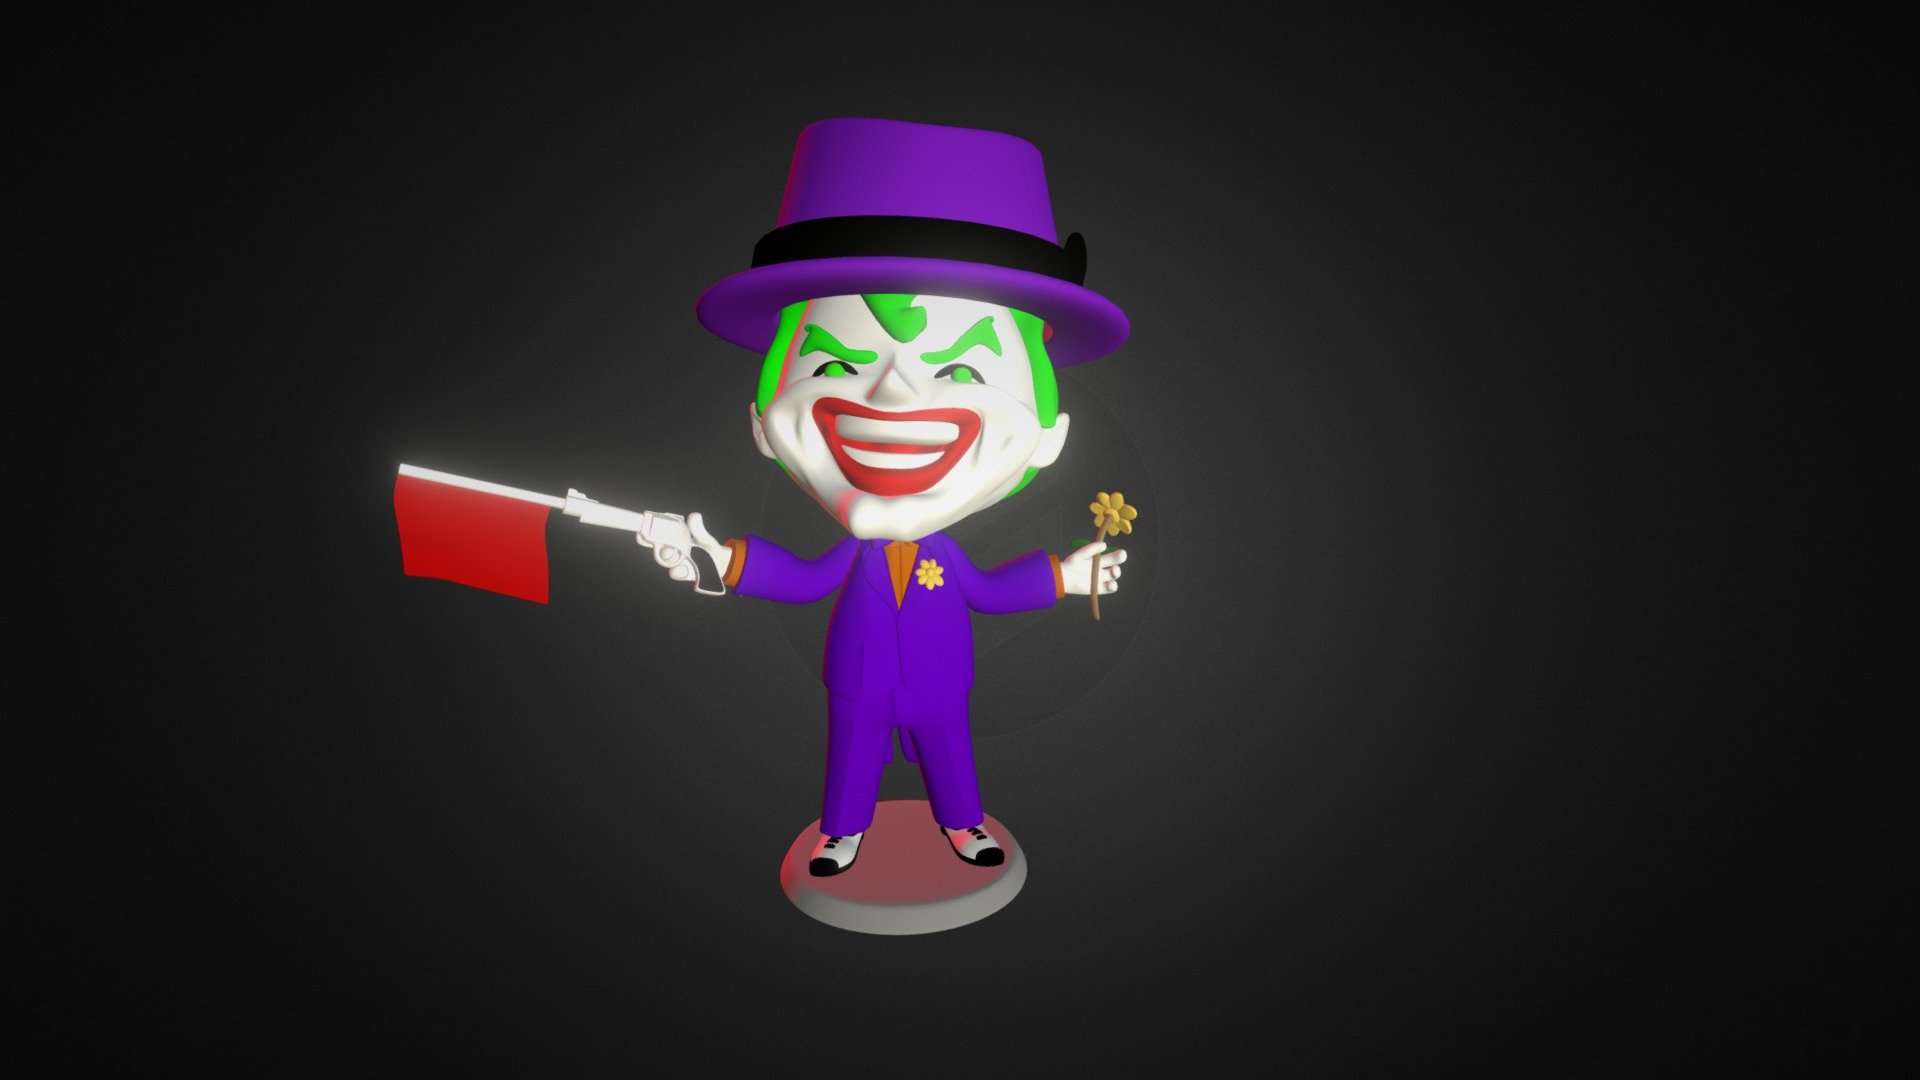 Roboplastik is proud to present this custom limited version of The Joker 3d model